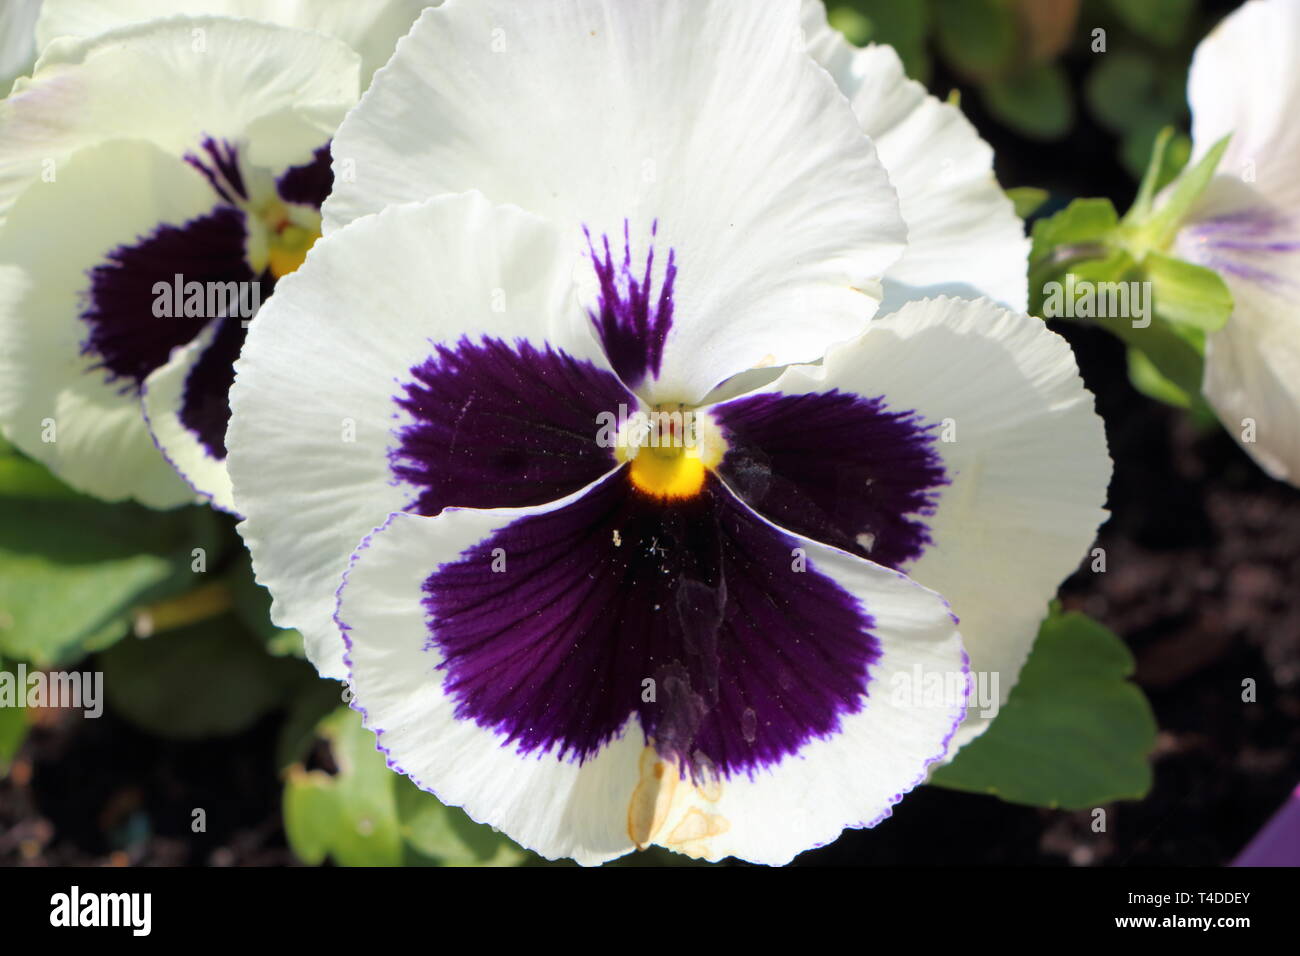 Black and white flowers of pansy in a garden Stock Photo